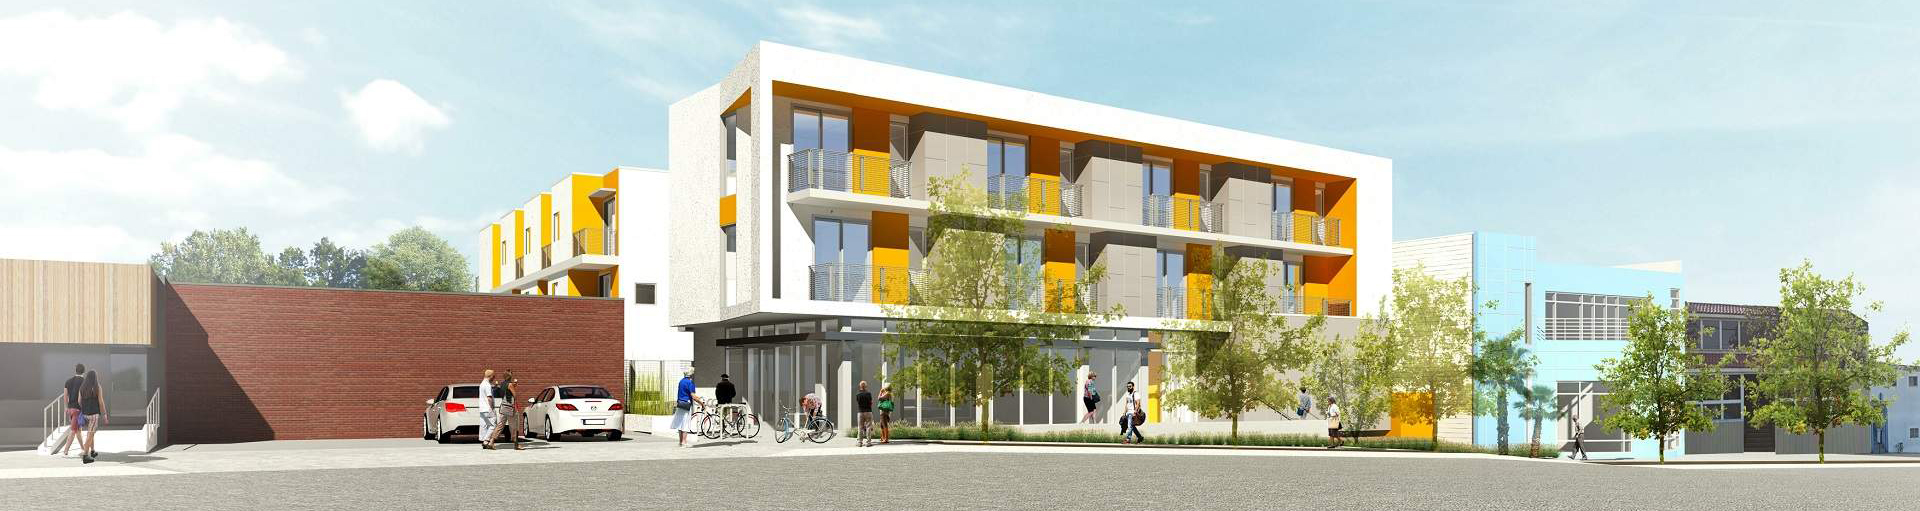  New Affordable Housing Opens in Santa Monica